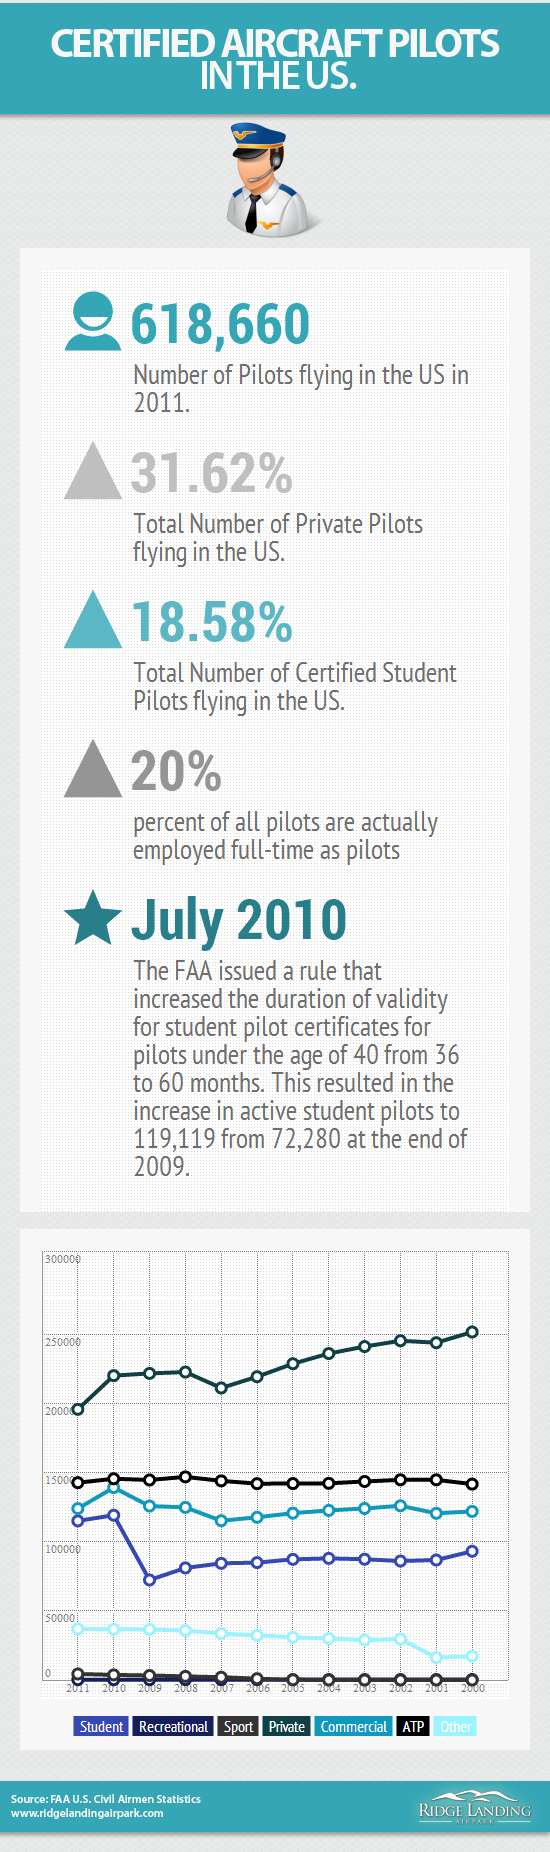 Certified Aircraft Pilots In the United States Infographic